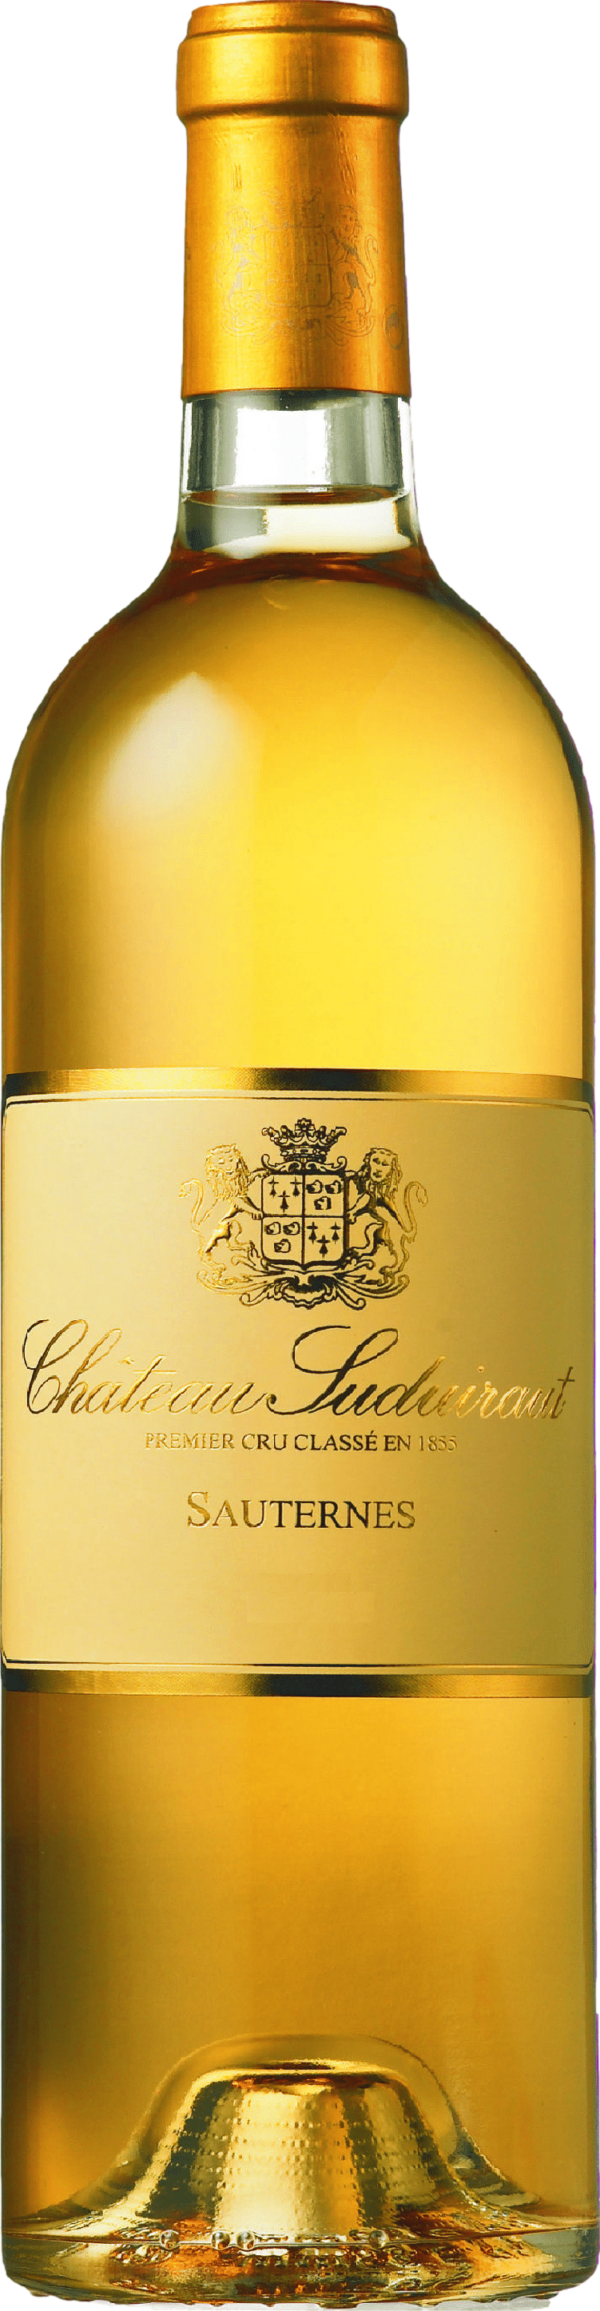 Product image of Chateau Suduiraut 2019 from 8wines